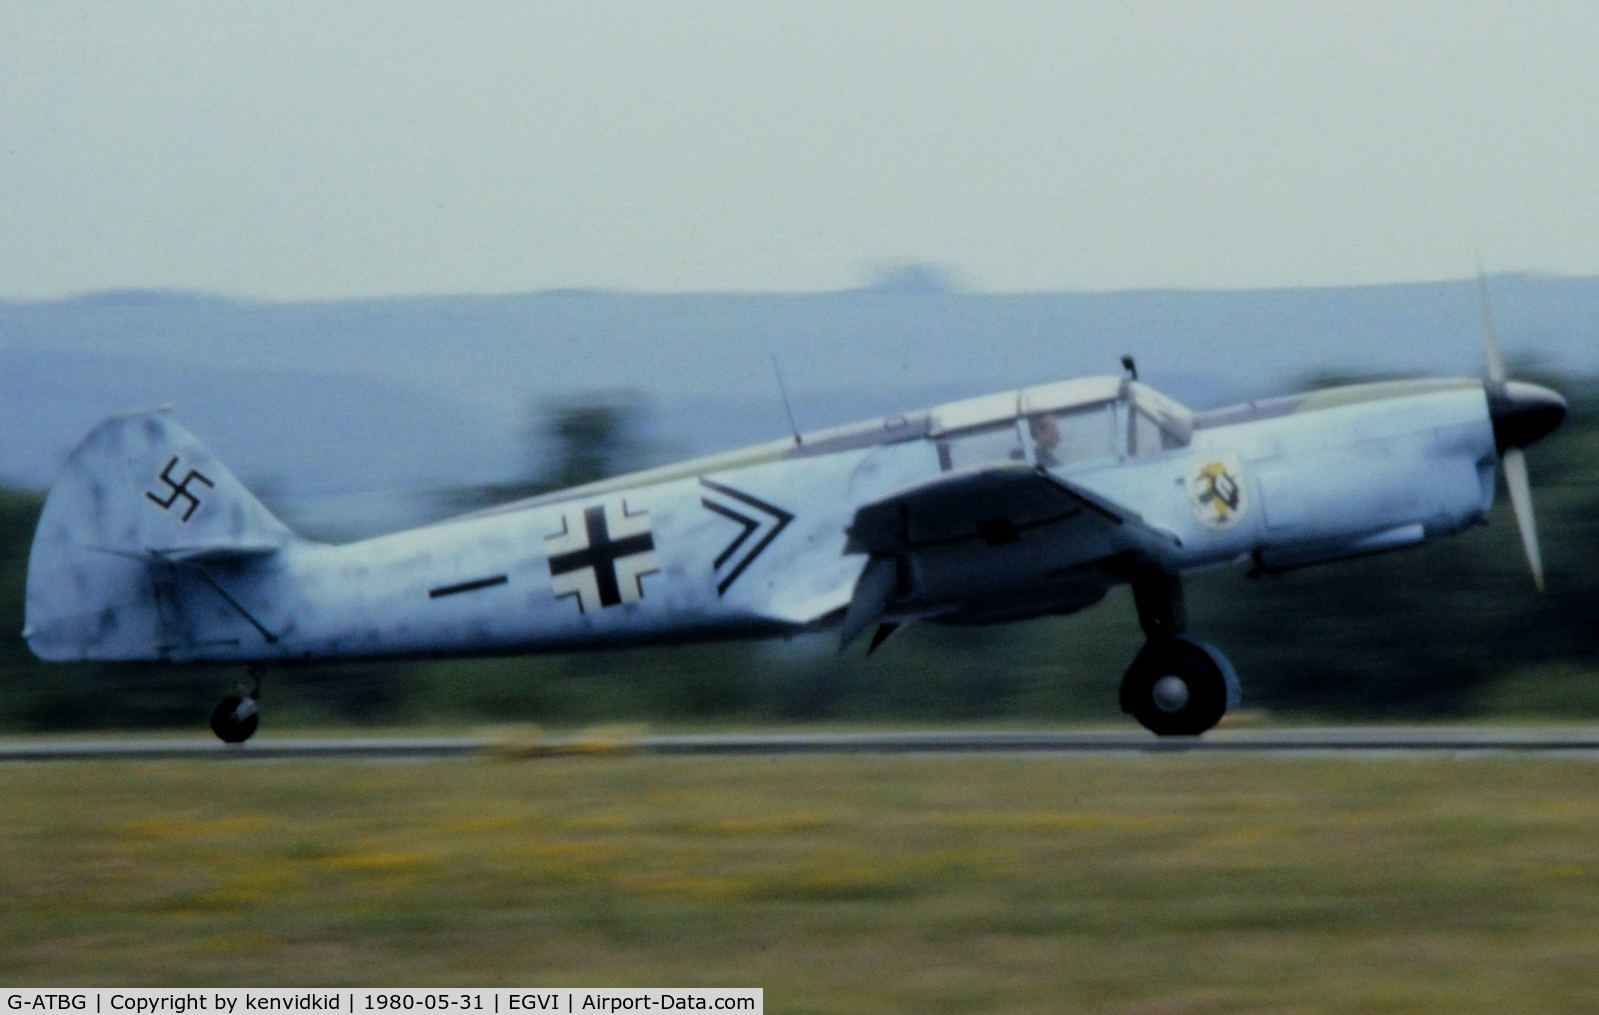 G-ATBG, 1945 Nord 1002 Pingouin II C/N 121, At the 1980 International Air Tattoo Greenham Common, copied from slide.